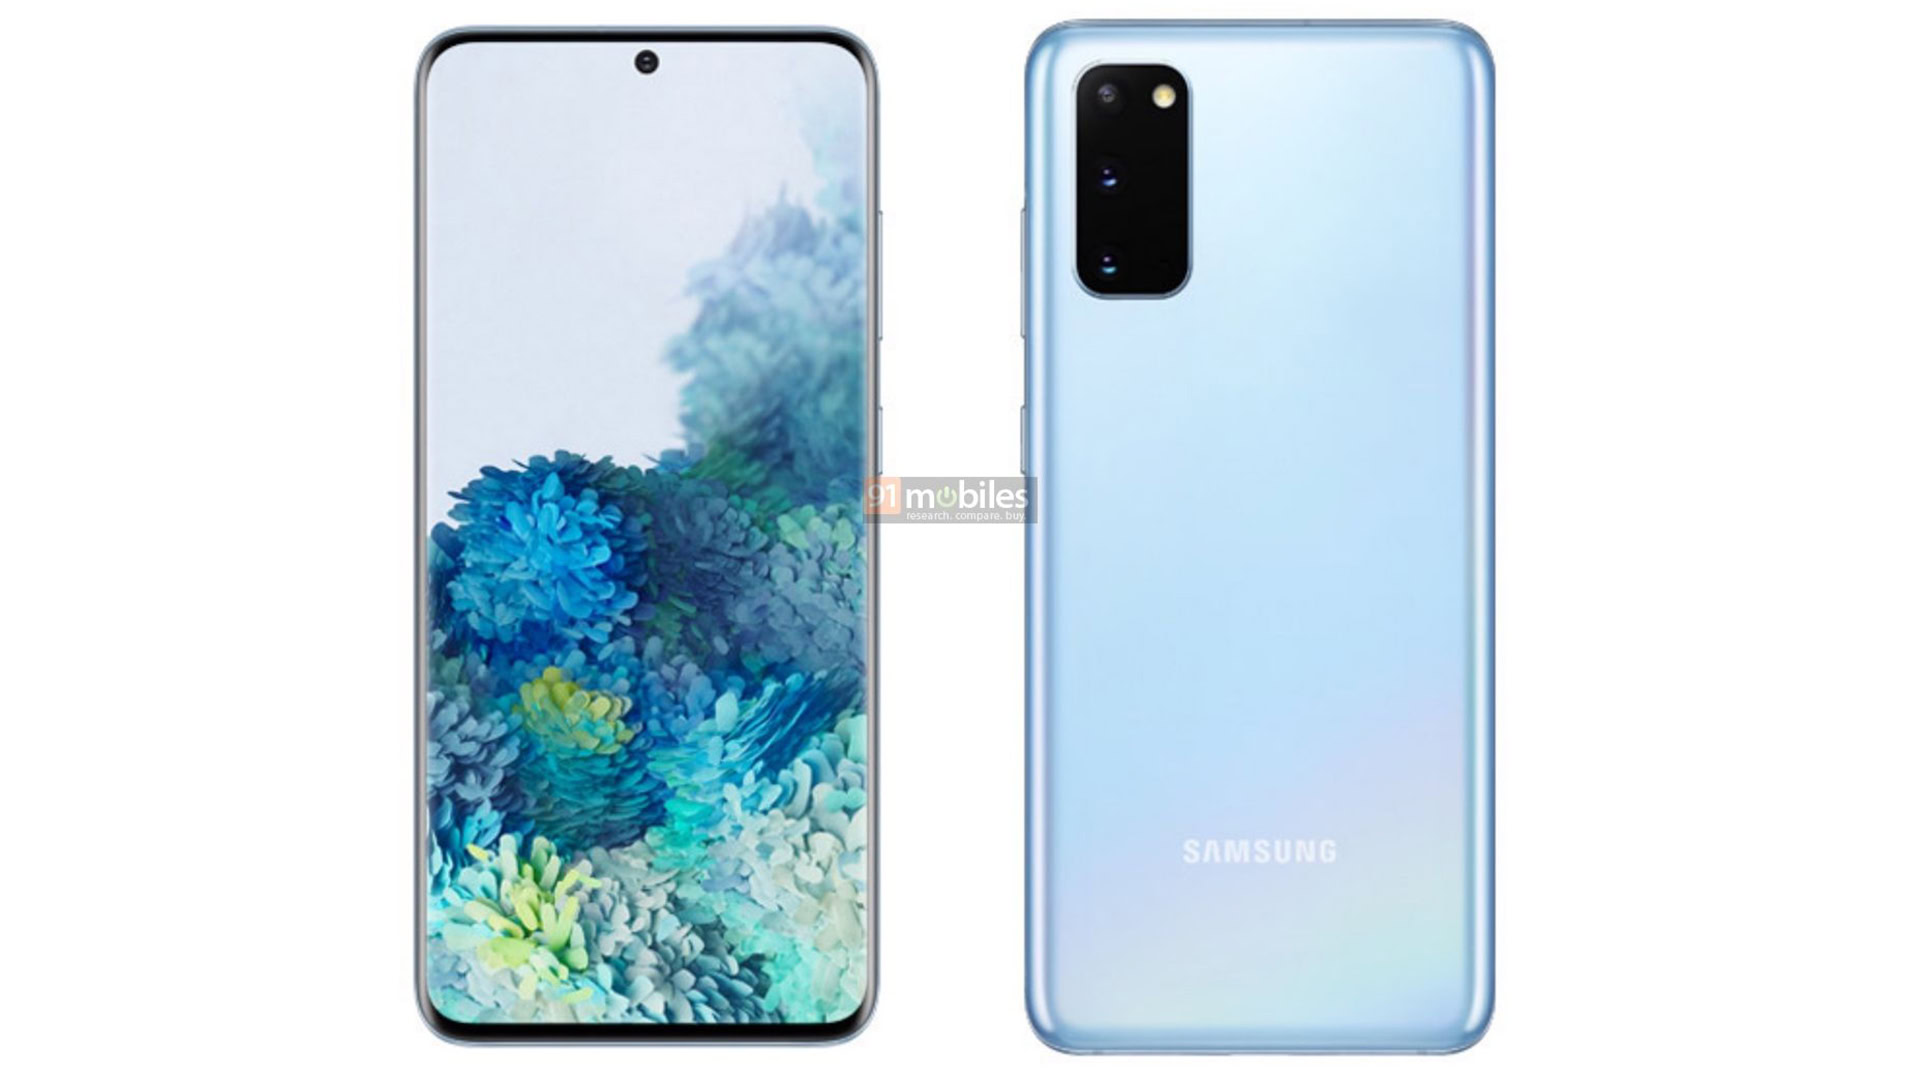 Samsung Galaxy S20 Ultra 5G and rest of S20 family leaks nearly in